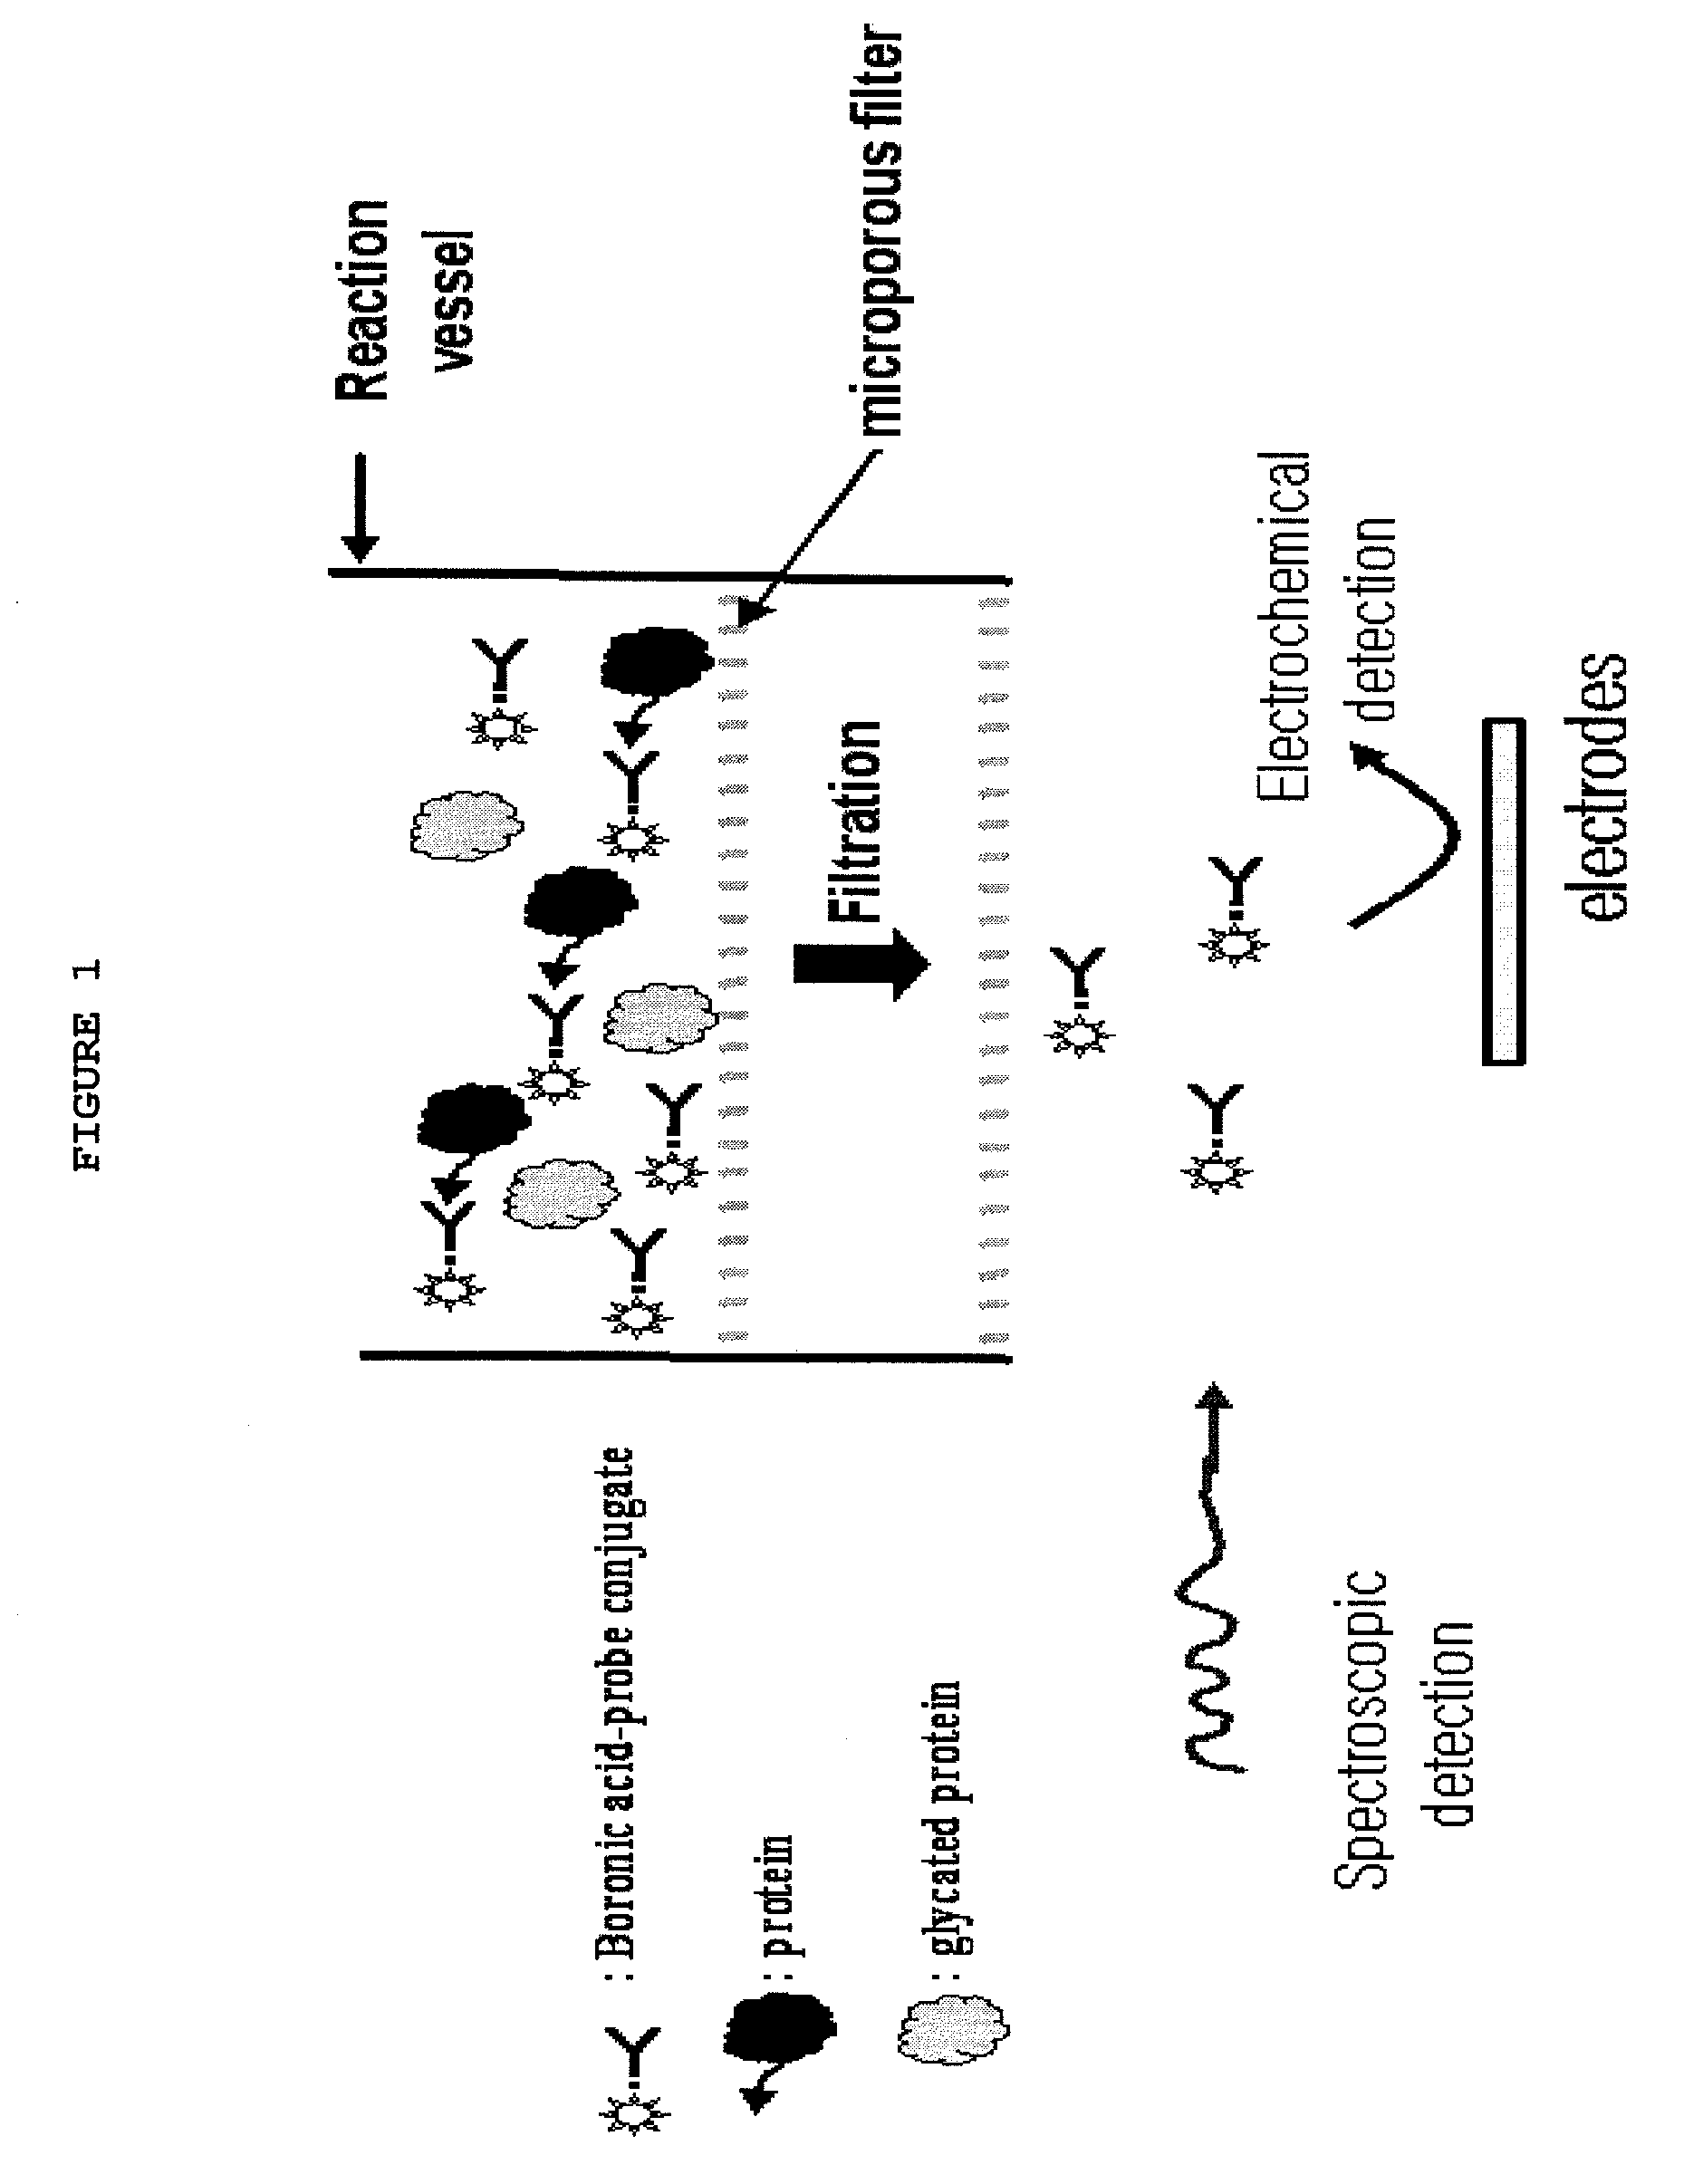 Electrochemical determination system of glycated proteins